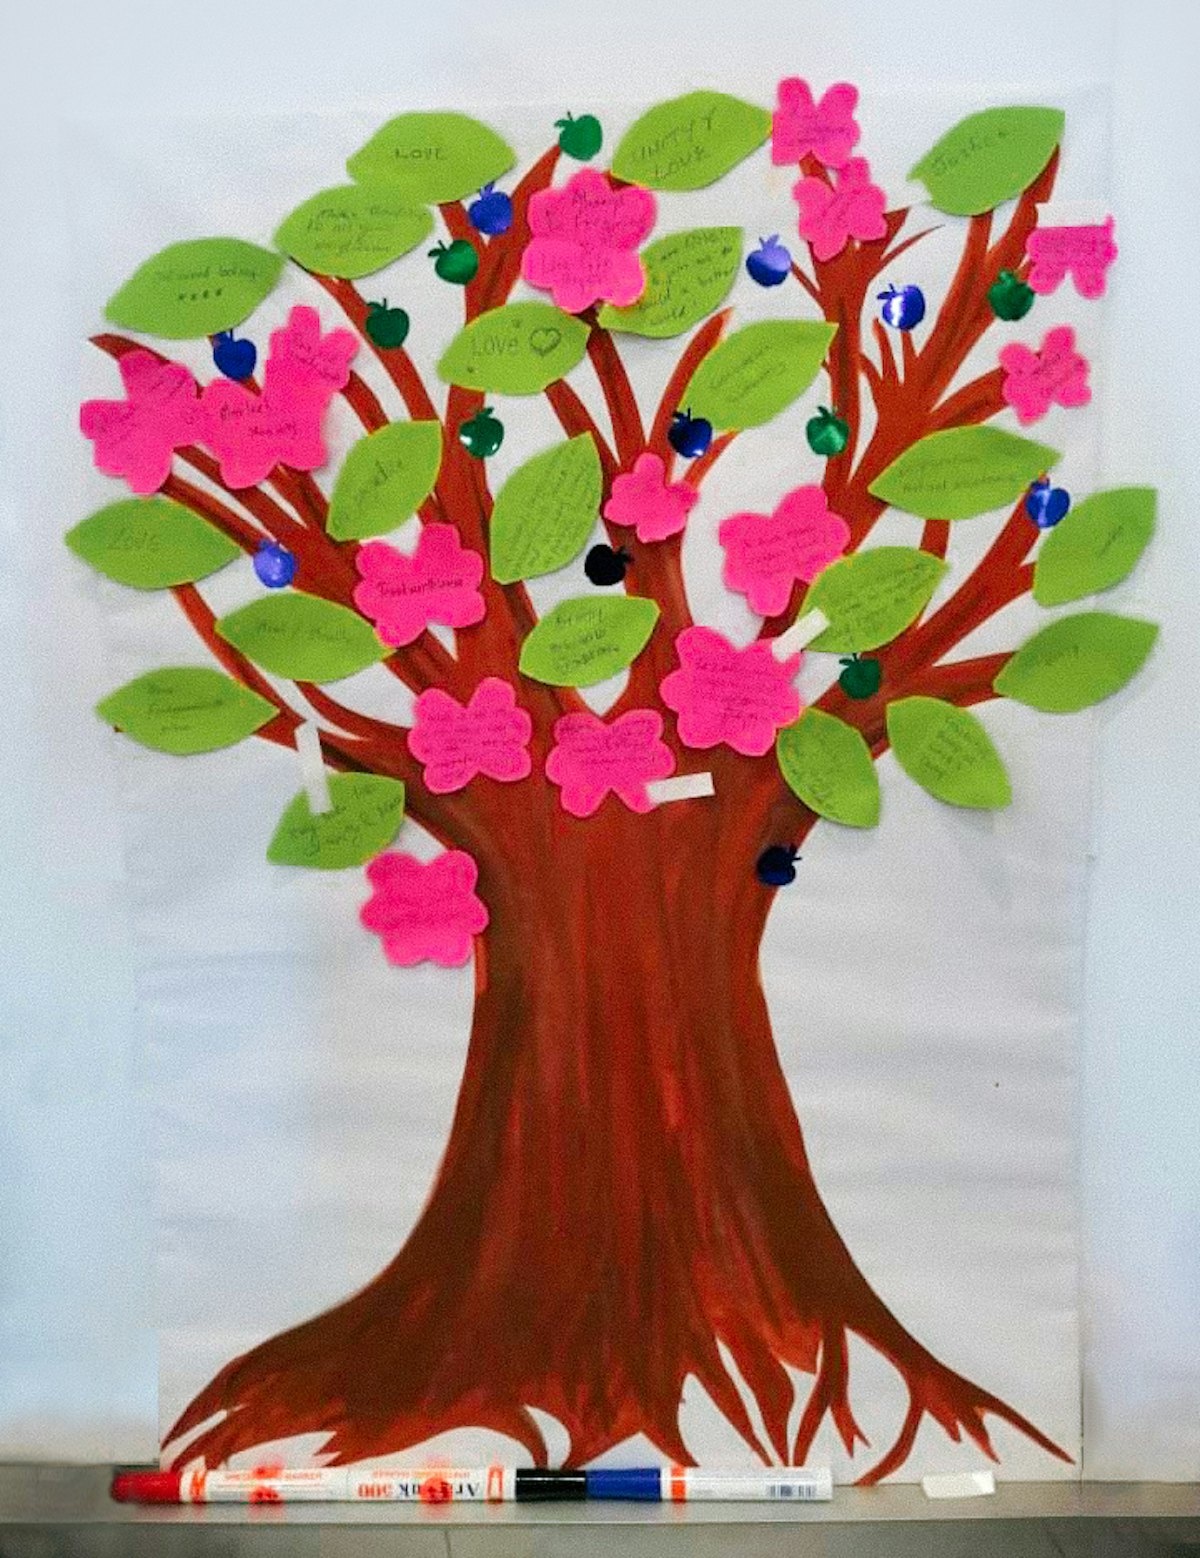 At a gathering in Malaysia, a collaborative art piece was created using a tree as a symbol of diversity and the abundance of spiritual qualities that God has given humanity.